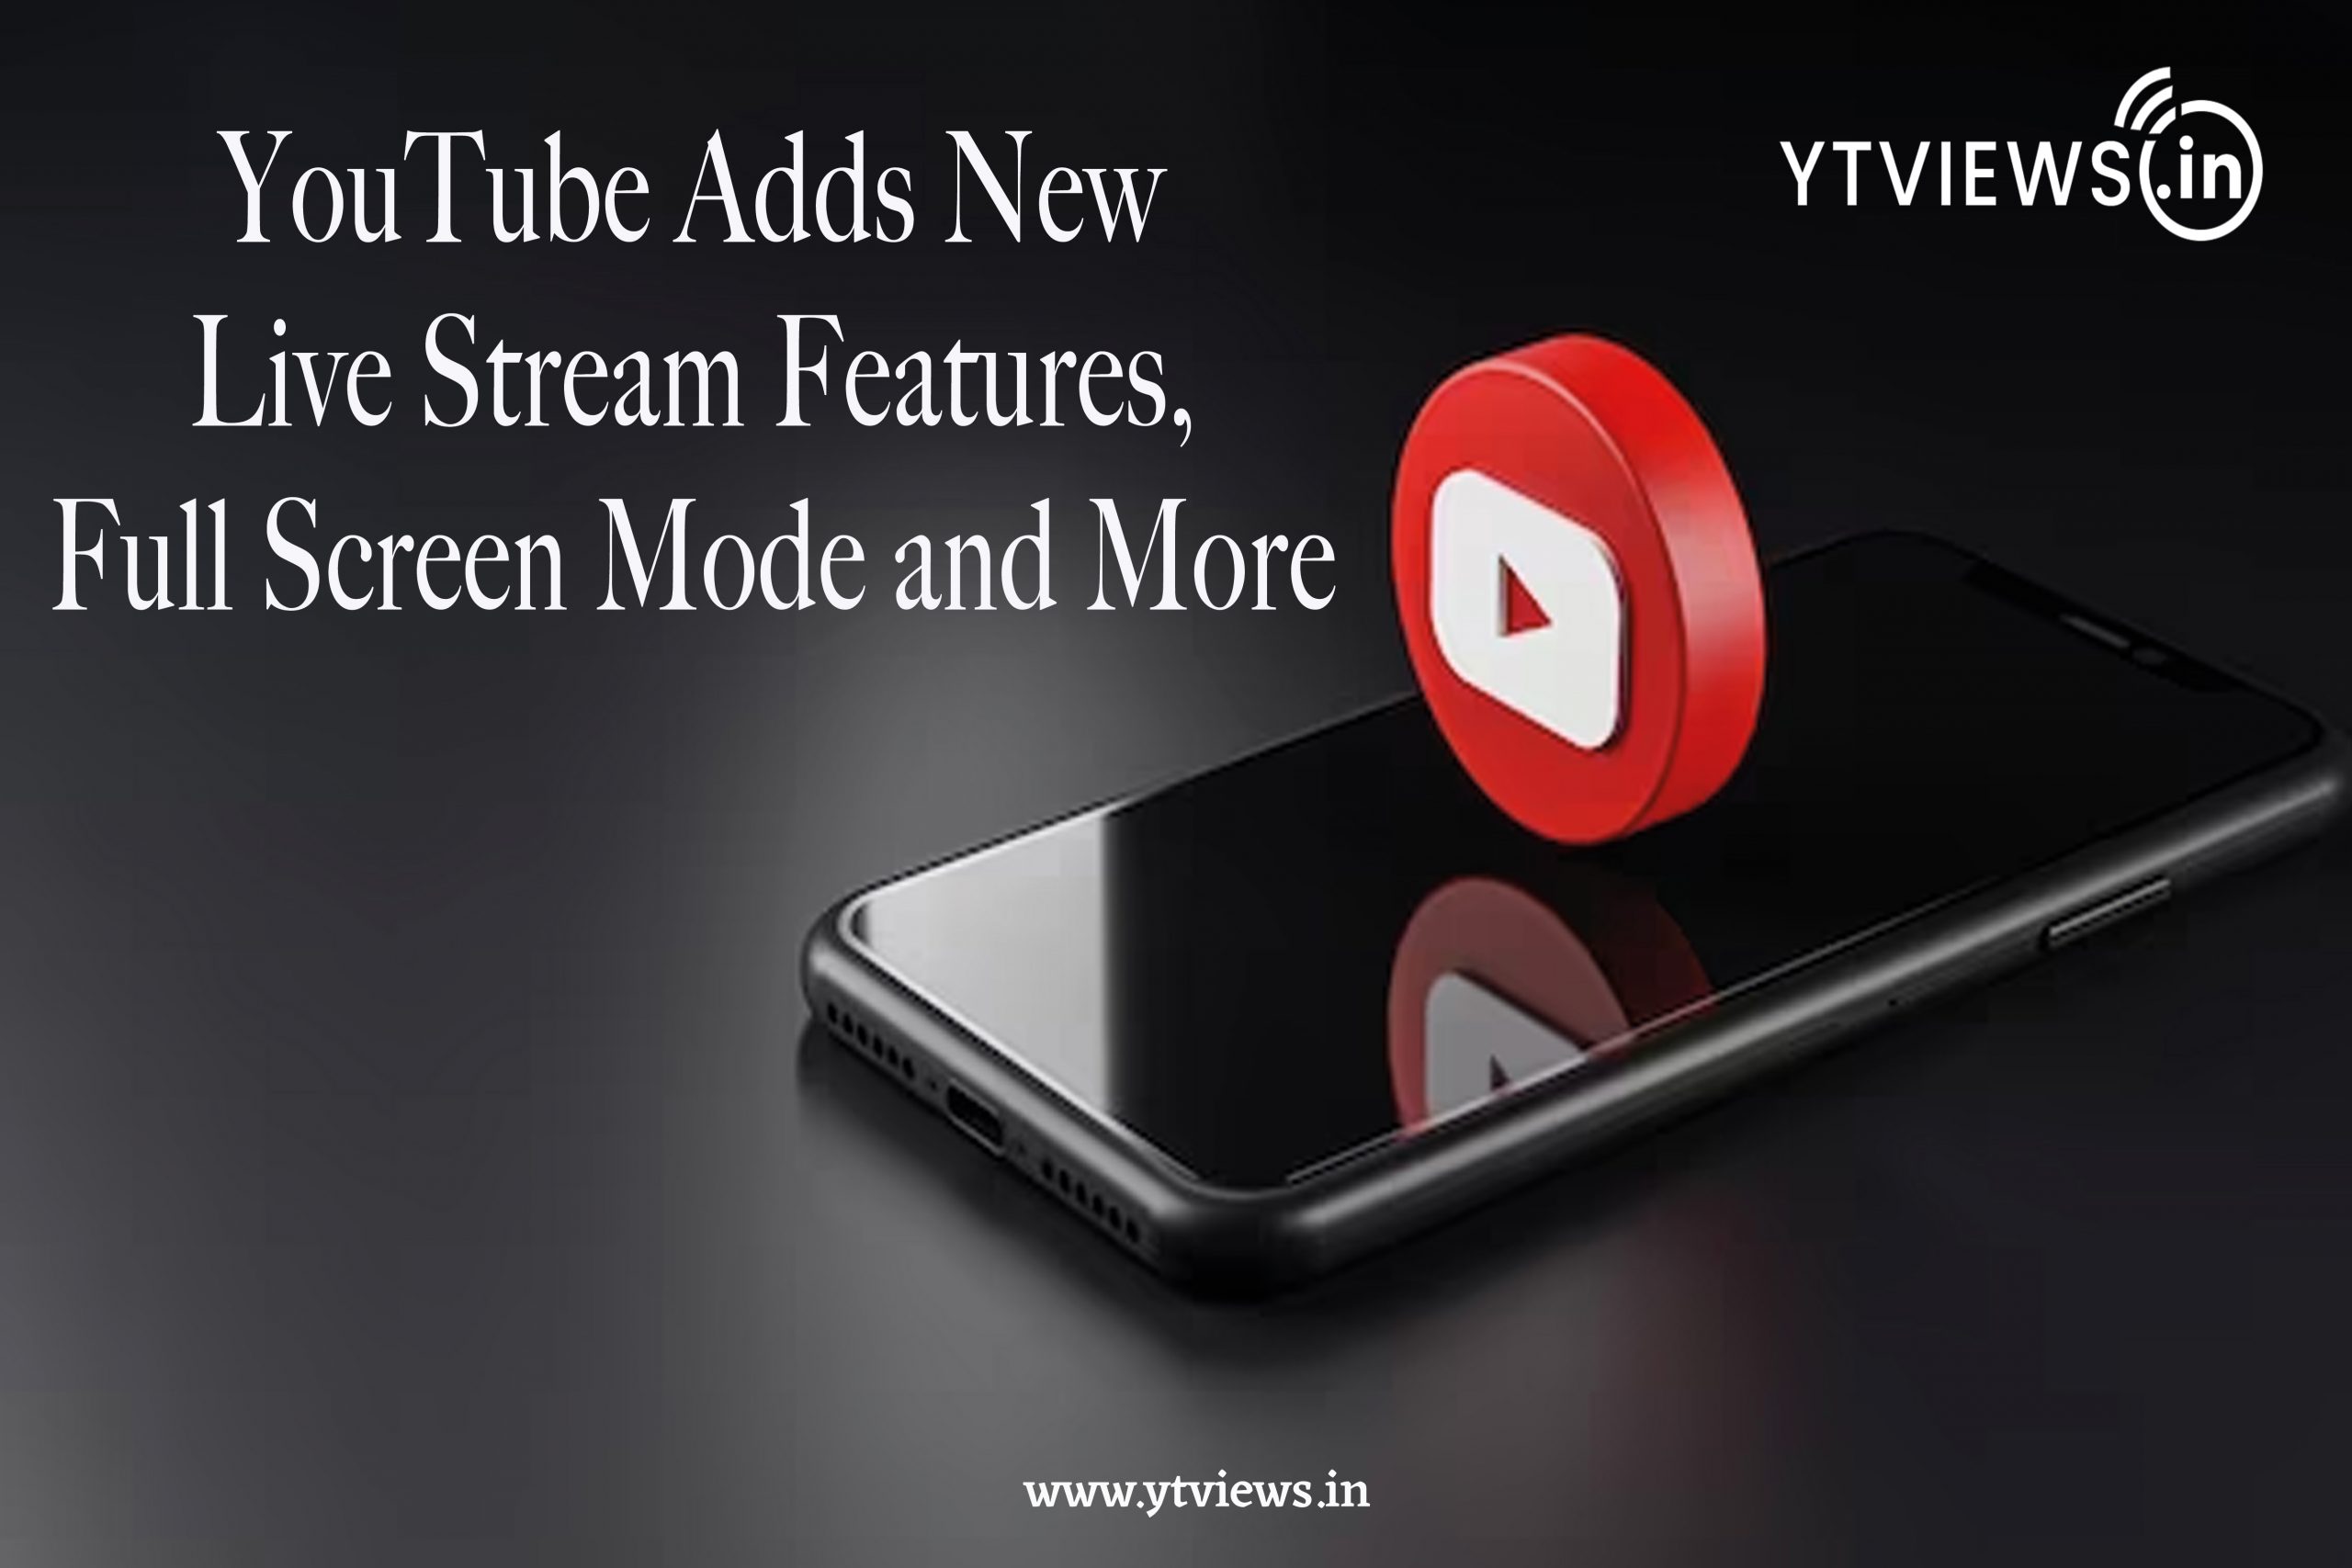 YouTube adds new Live Stream features, Full-Screen mode and more